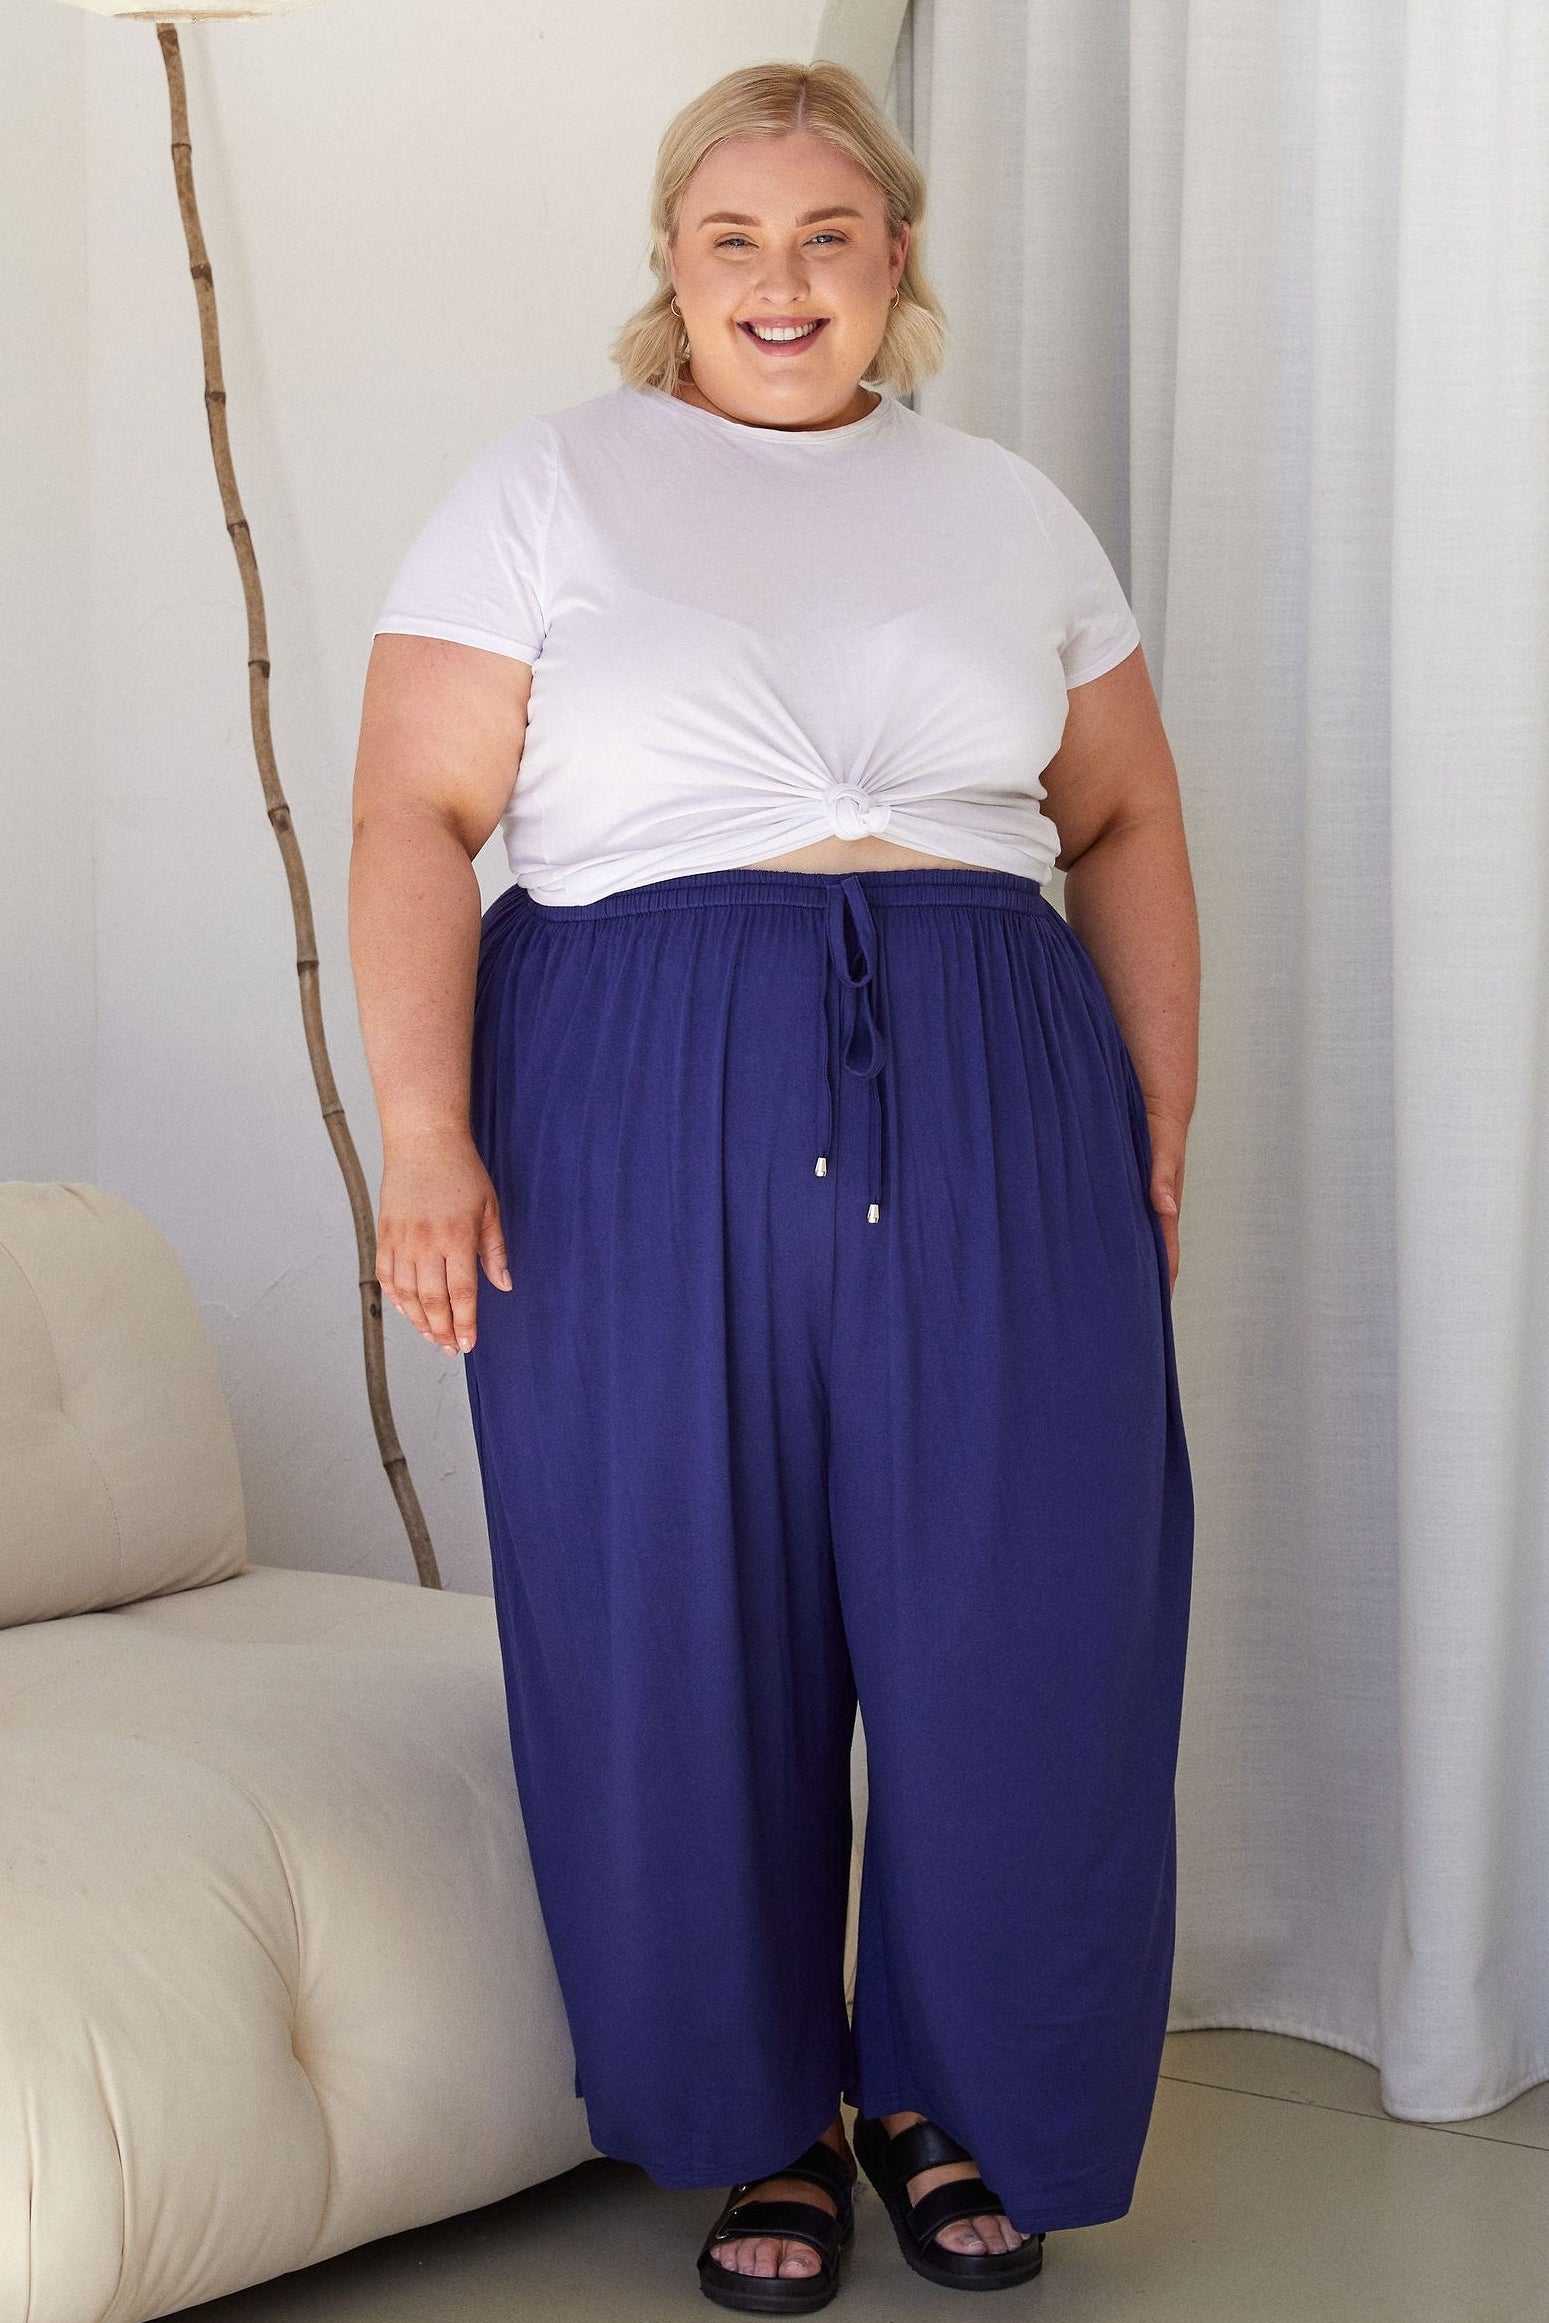 Plus Size Women's Clothing in Size 28